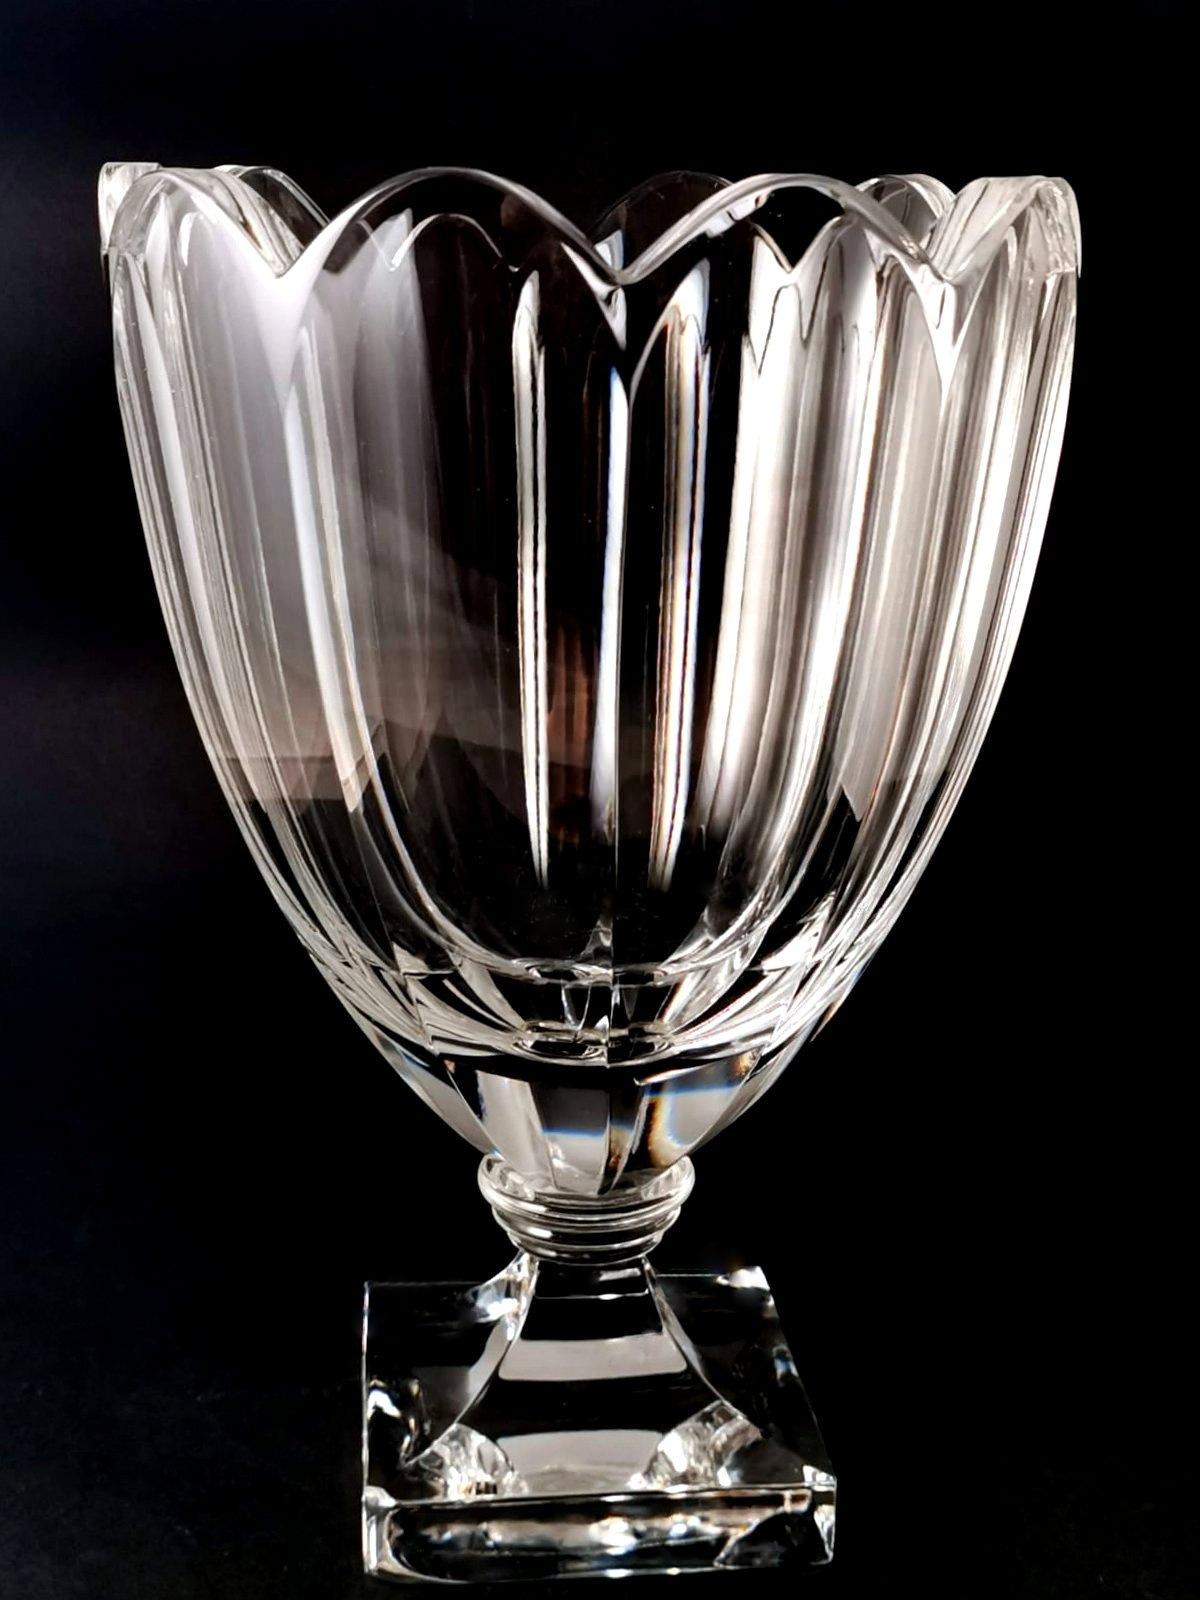 We kindly suggest that you read the entire description, as with it we try to give you detailed technical and historical information to ensure the authenticity of our objects.
Exceptional and important Swedish crystal vase has a high percentage of